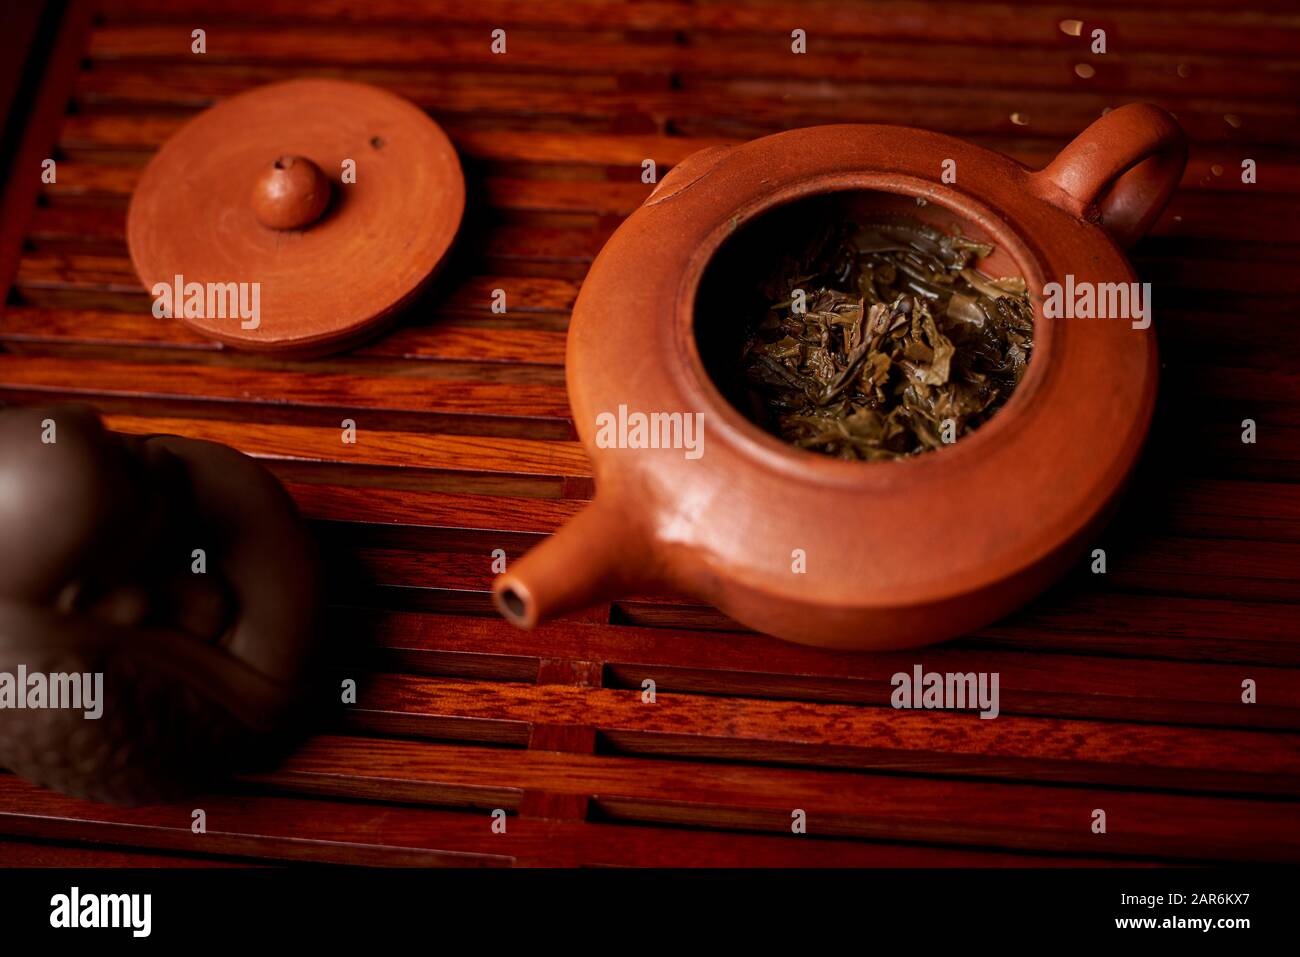 Brewed tea leaves in a teapot. Stock Photo